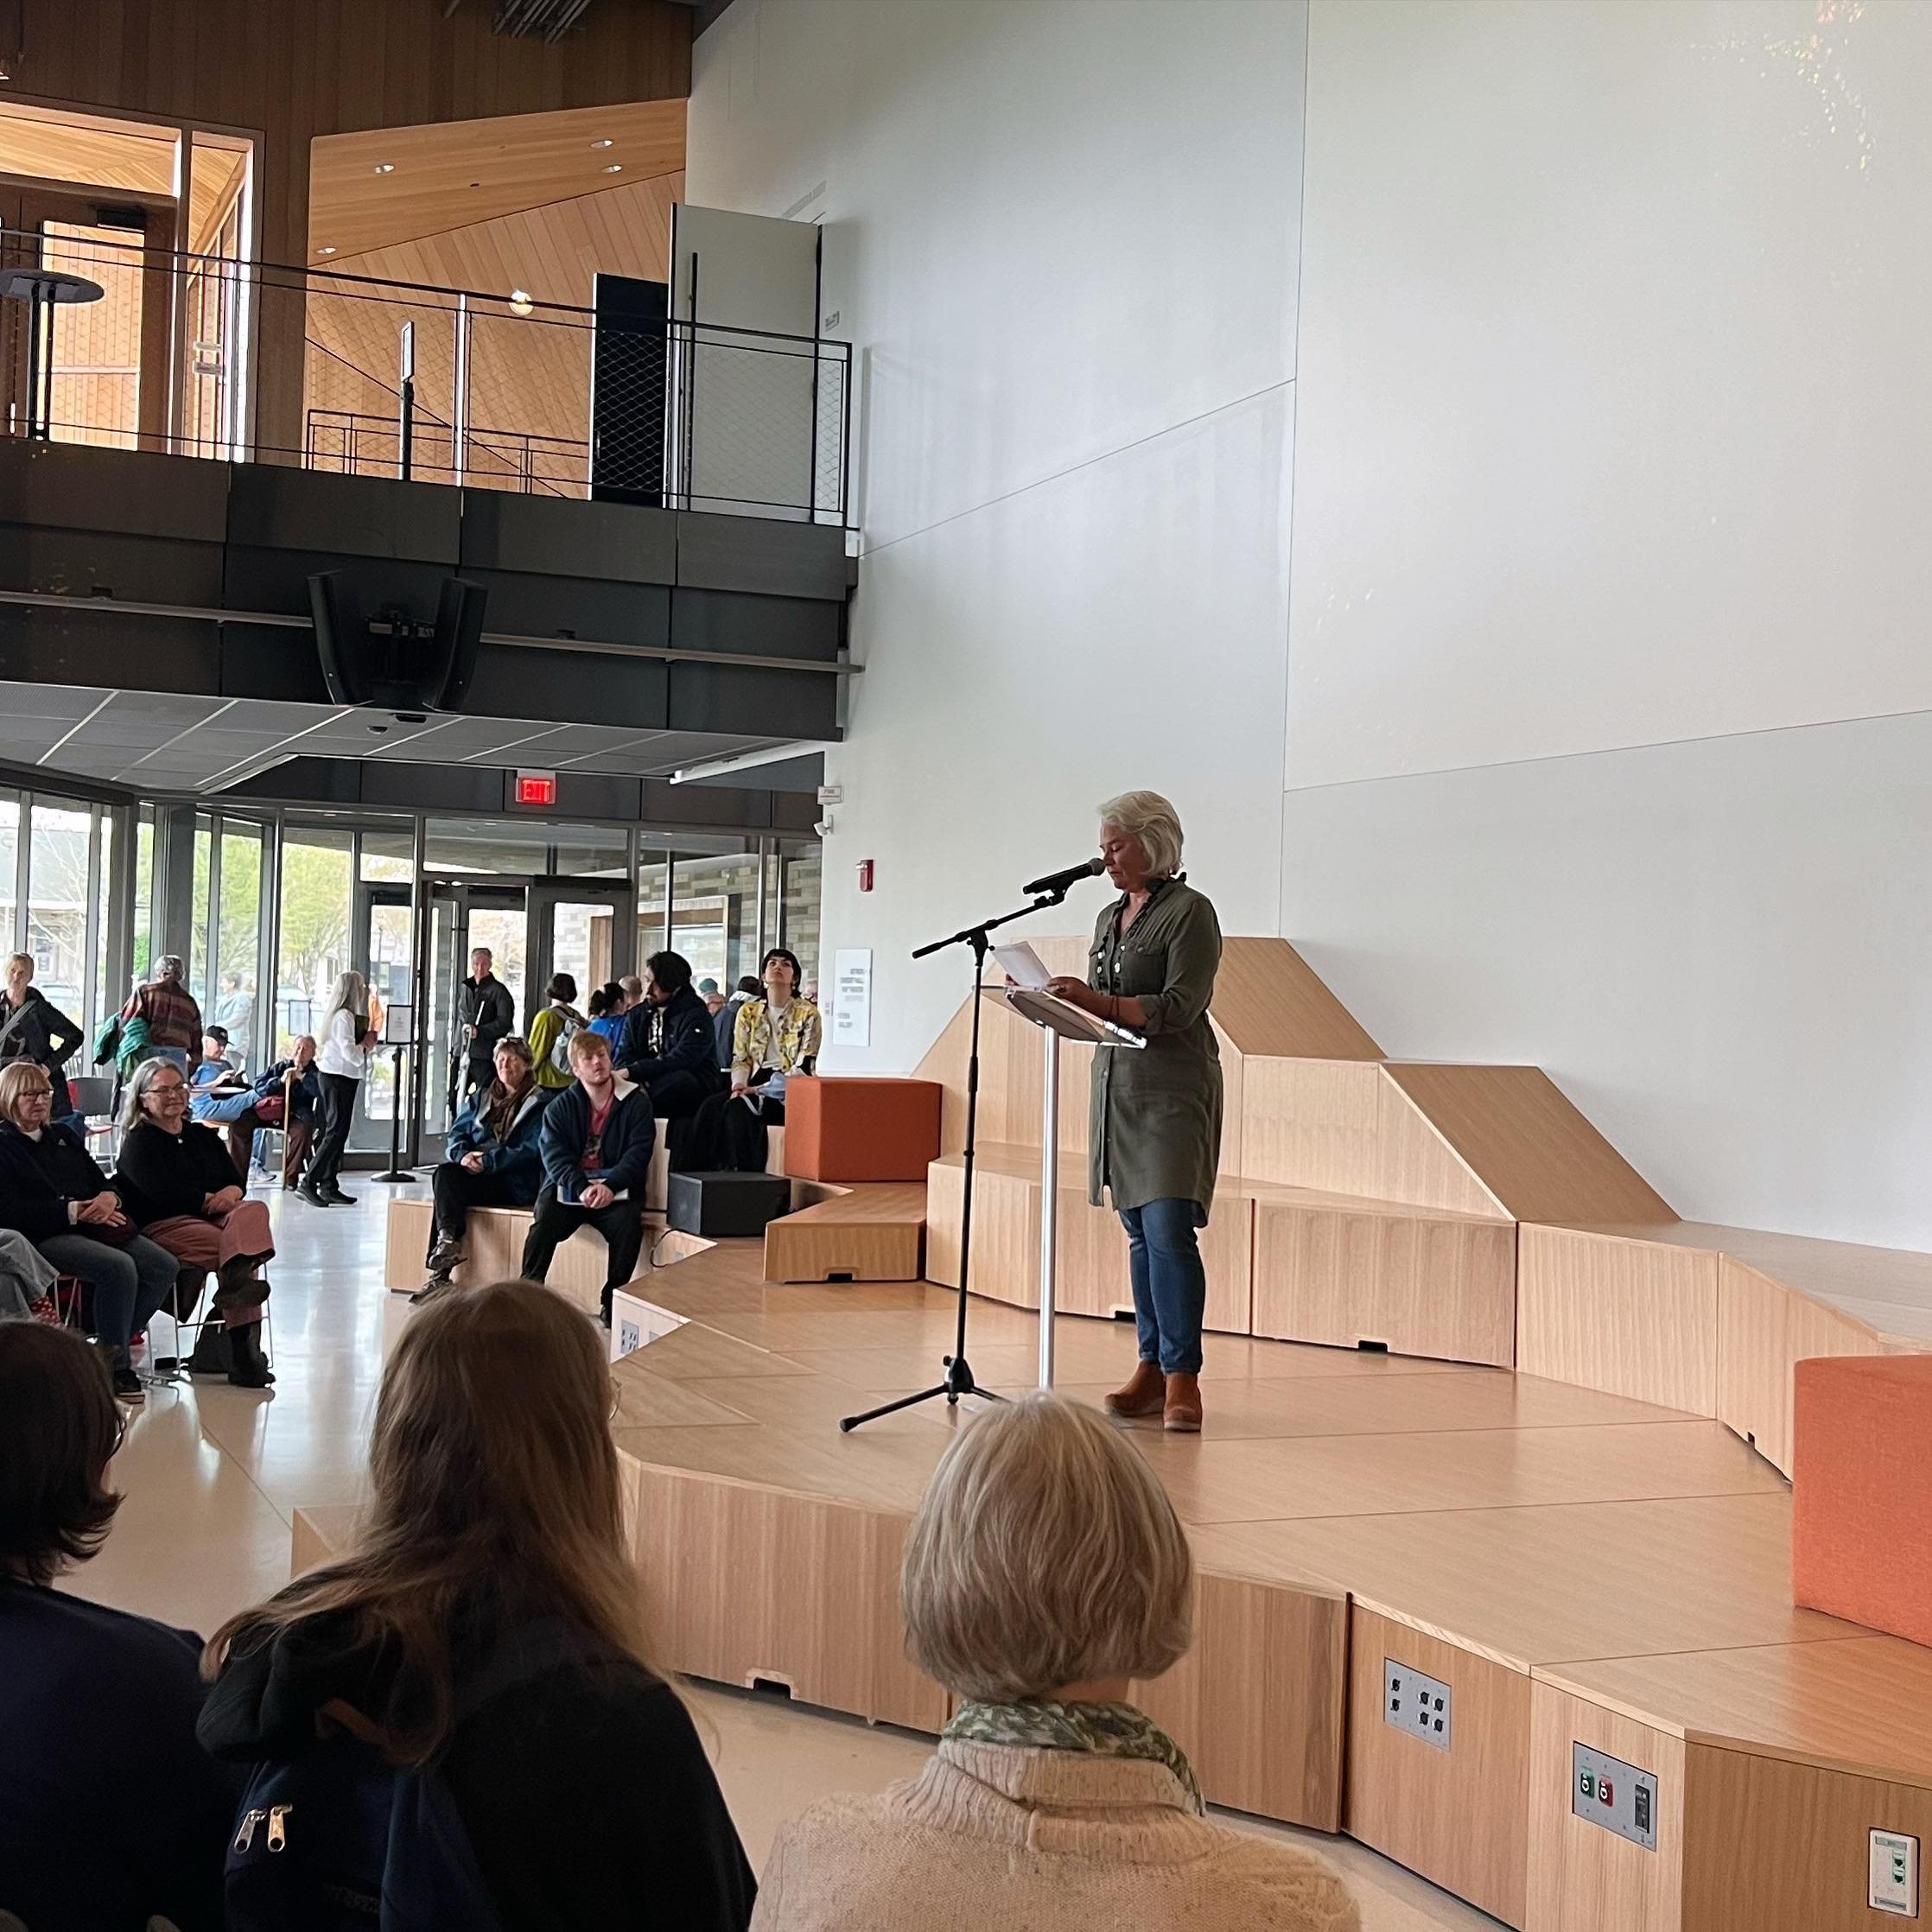 Reading poems at PRAx opening, new OSU center for performing arts&hellip;
#springcreekproject